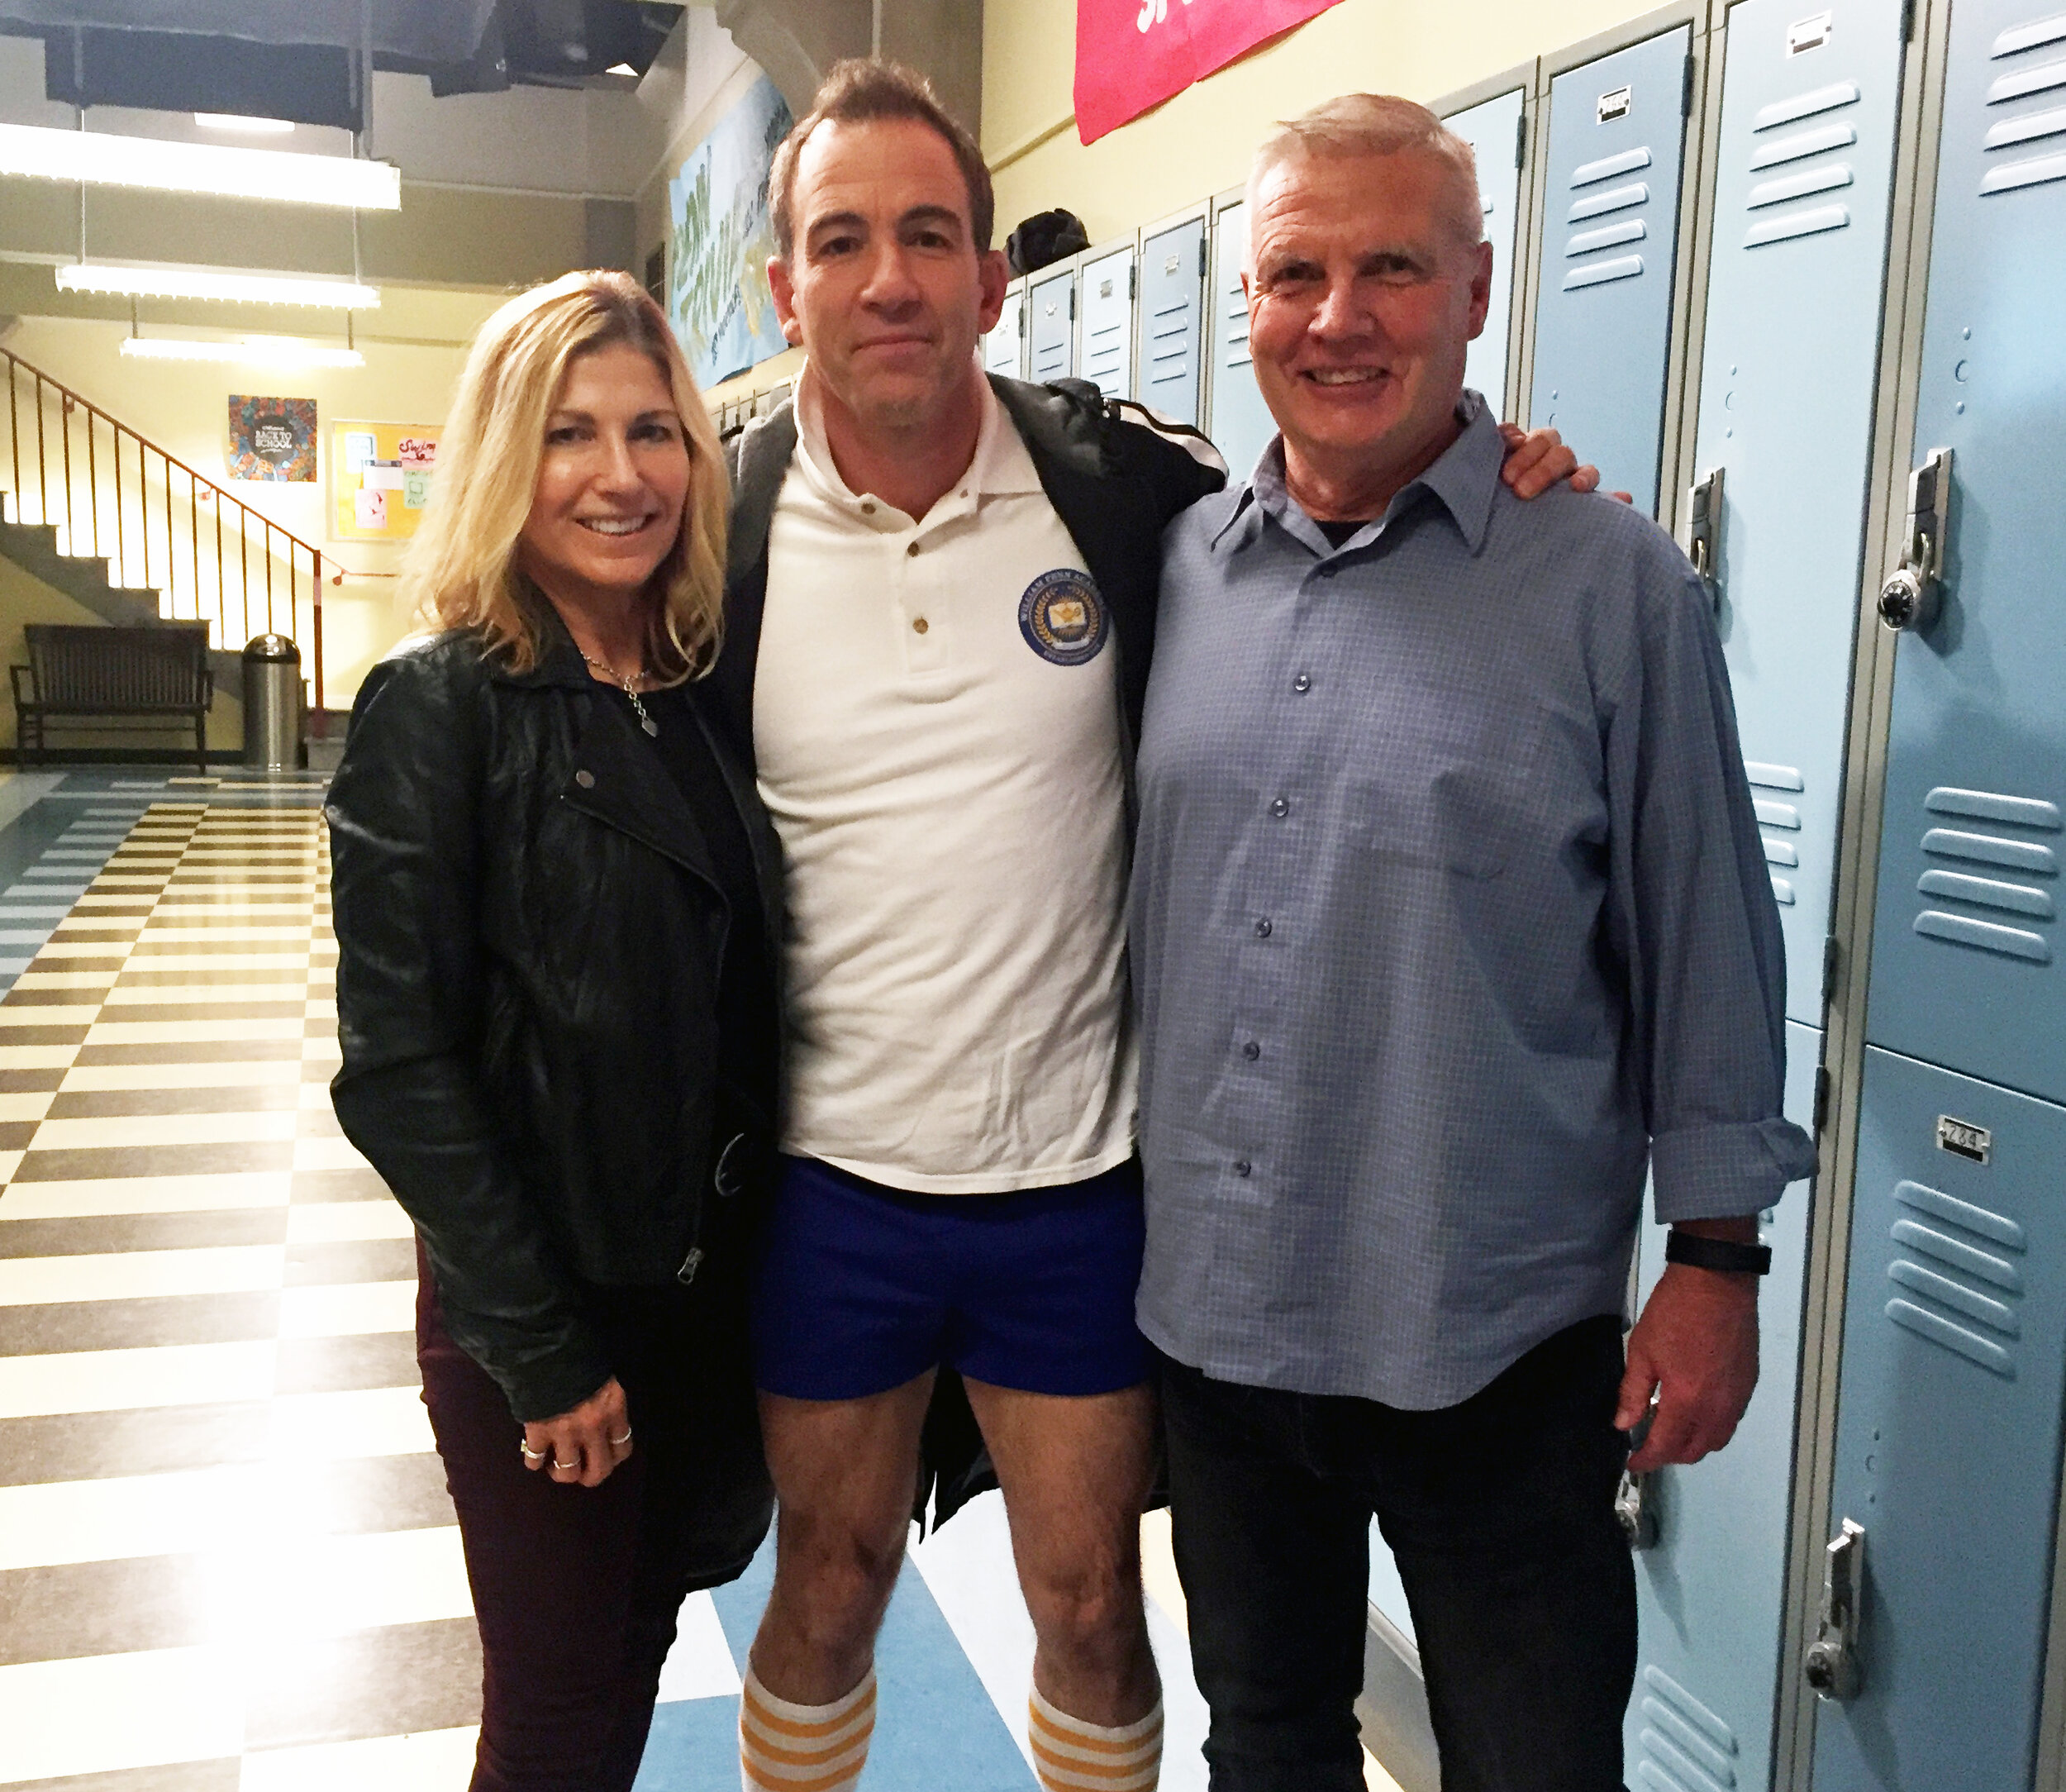 Rickey Mellor and his wife Mary on the set with Bryan Callen.